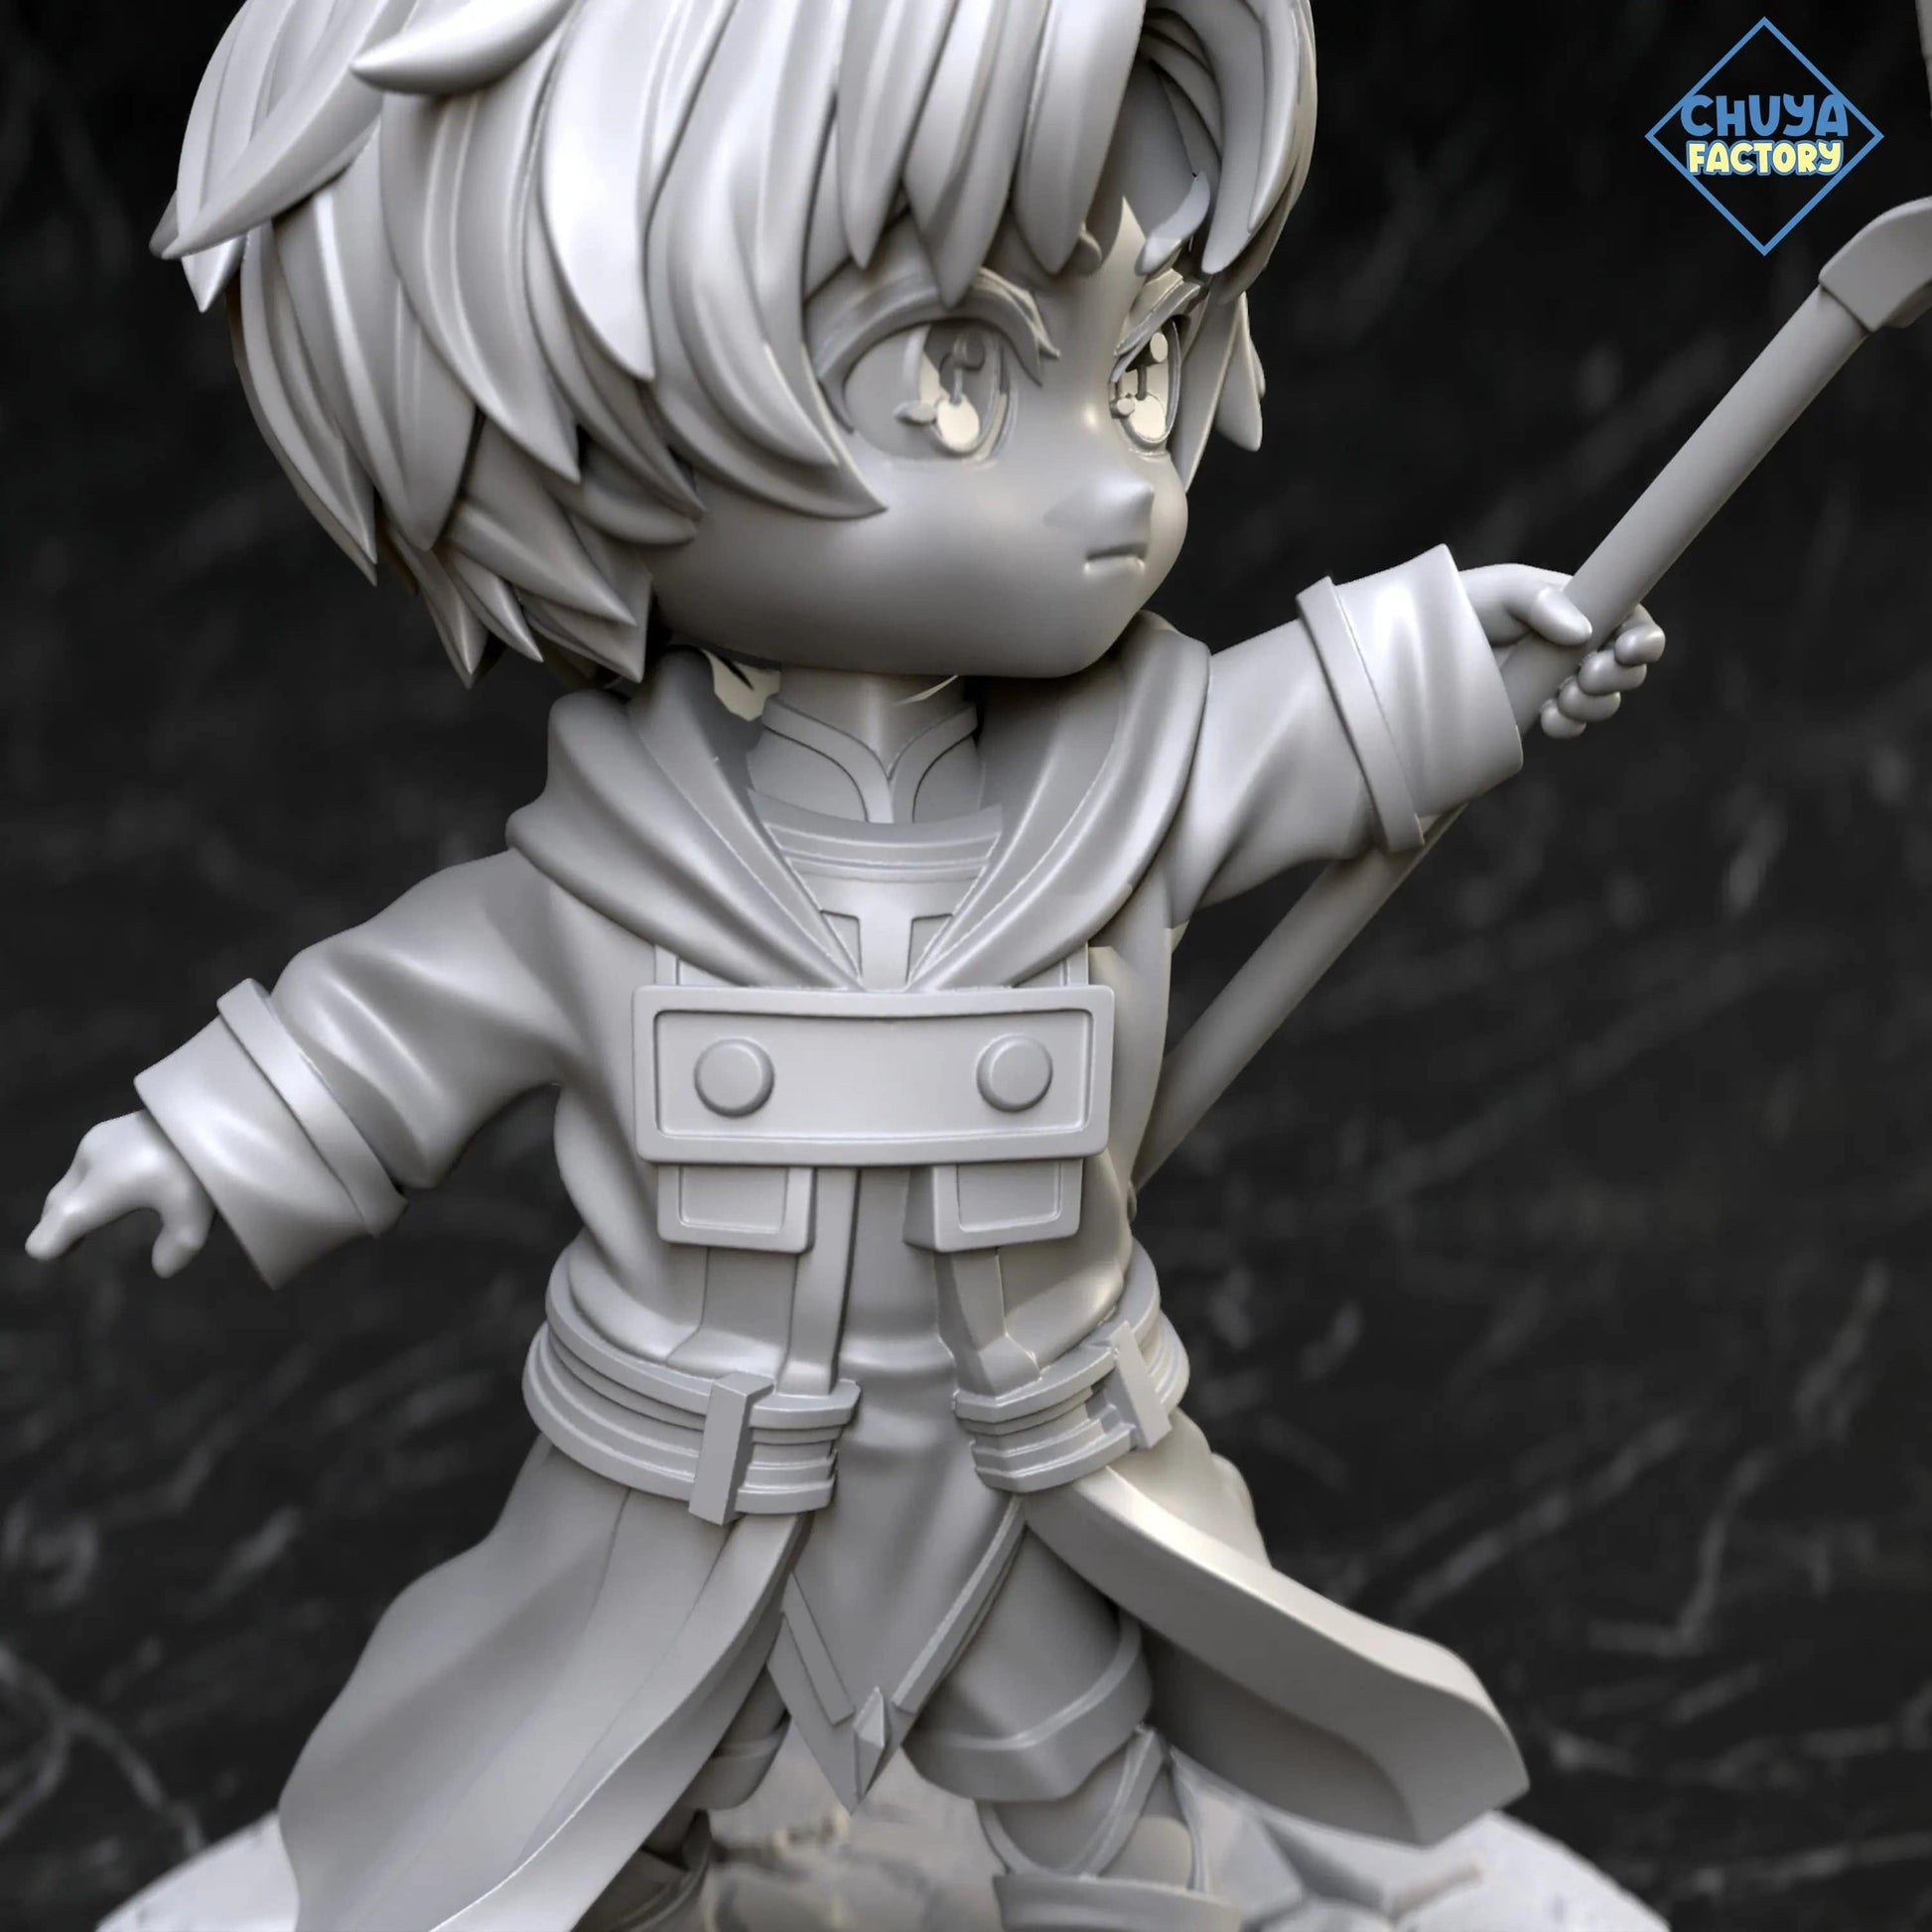 The Right Hand of the Dragon God Chibi | Resin Garage Kit Sculpture Anime Video Game Fan Art Statue | Chuya Factory - Tattles Told 3D